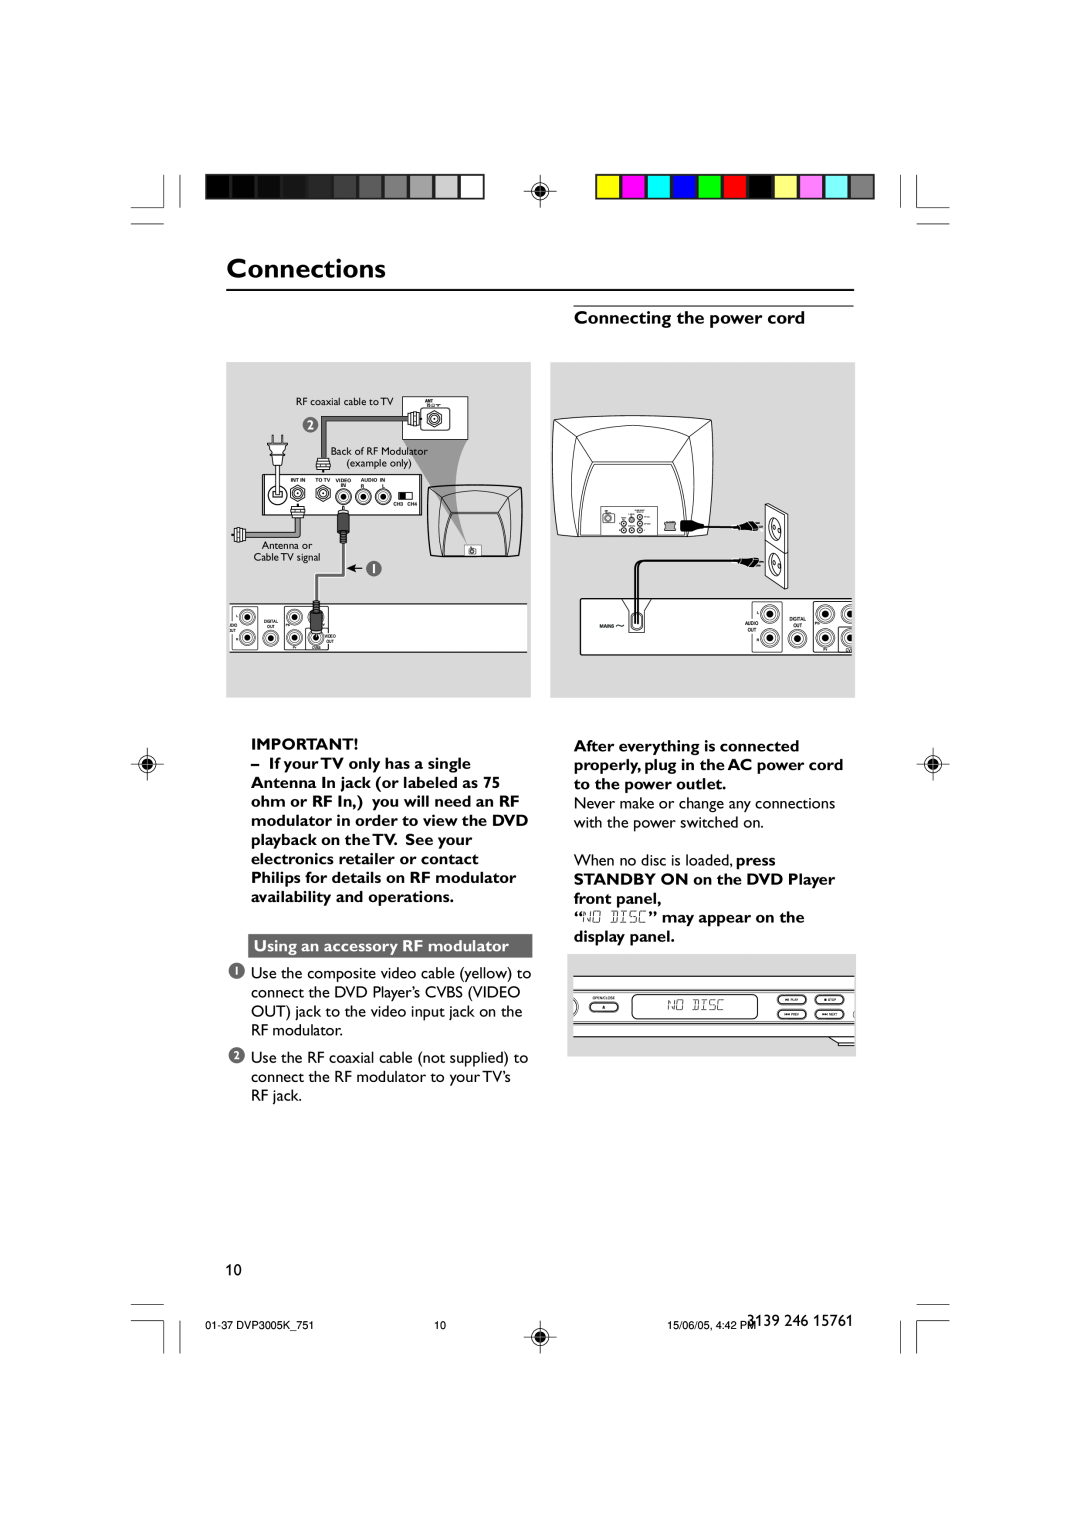 Philips DVP3005K/74 user manual Connections, Connecting the power cord, Using an accessory RF modulator 